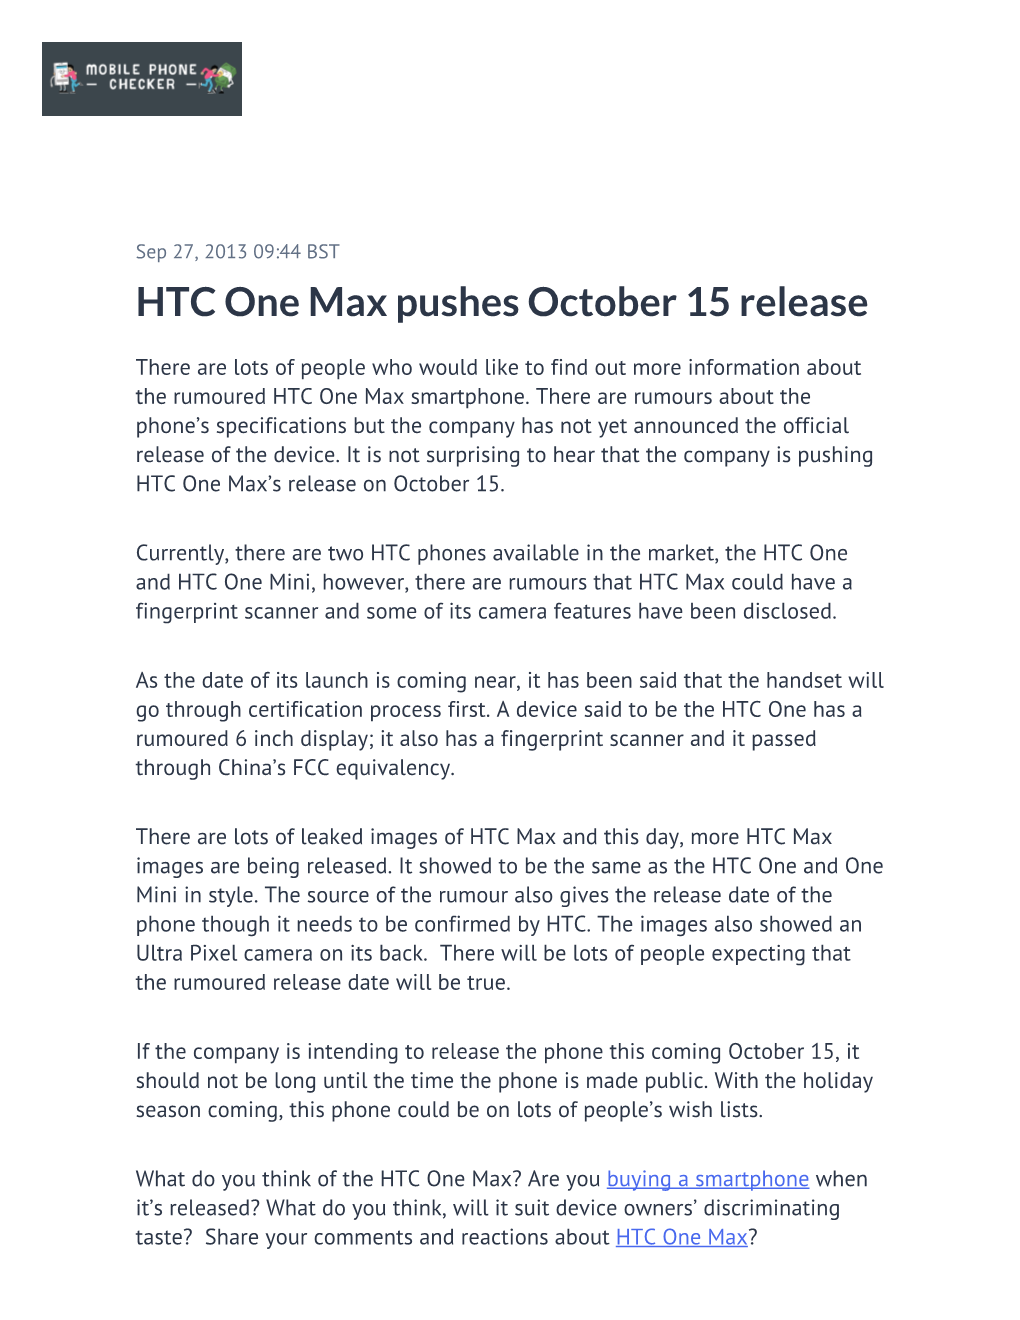 HTC One Max Pushes October 15 Release